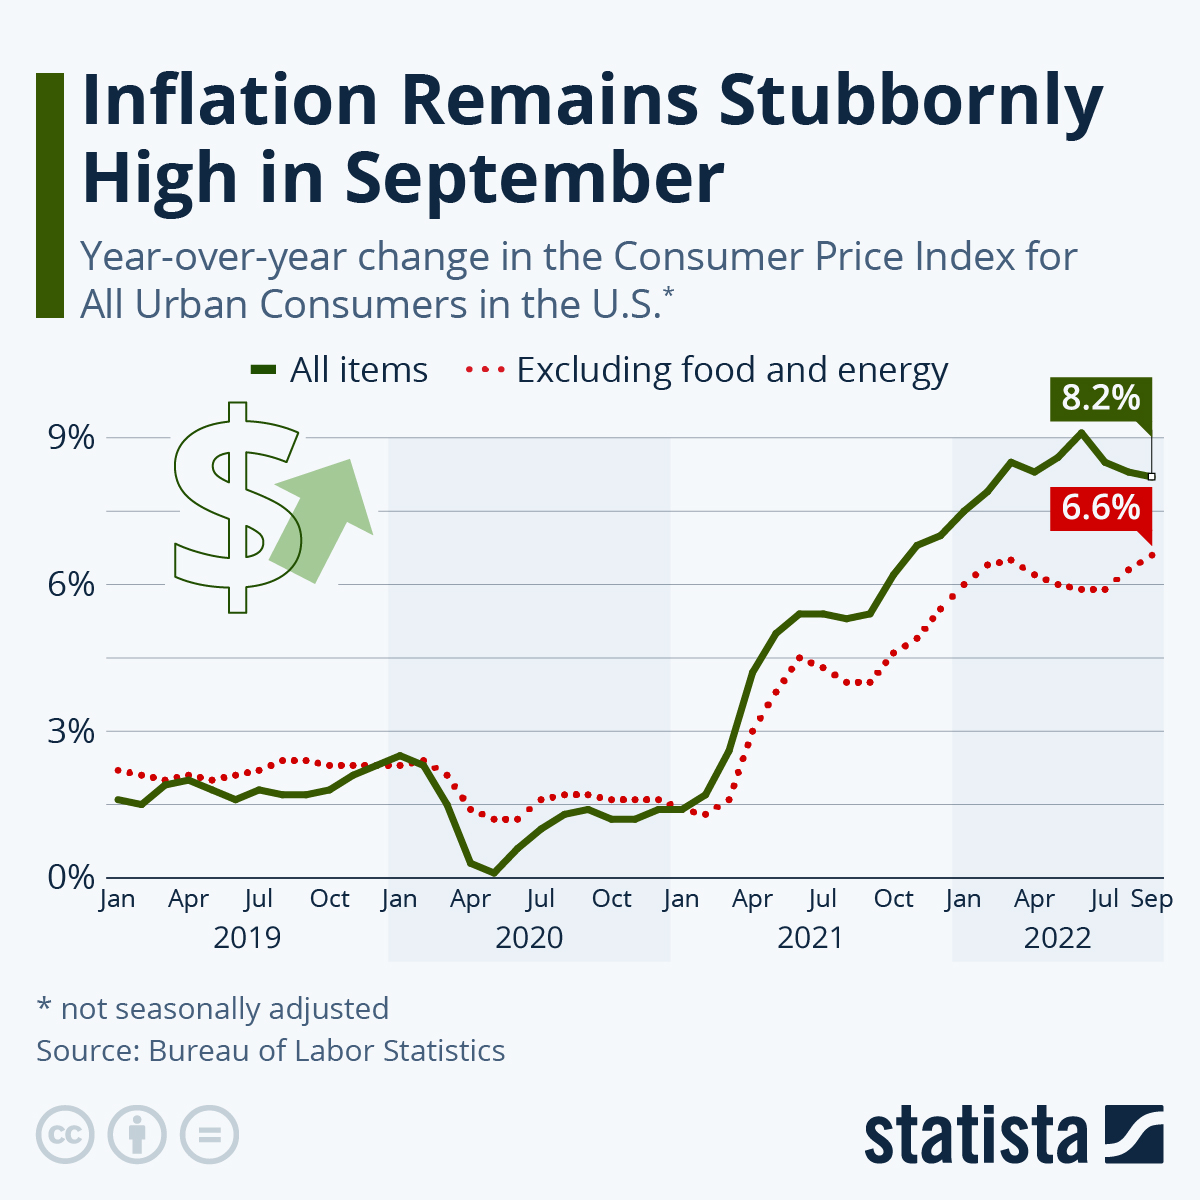 Inflation Remains Stubbornly High in September
